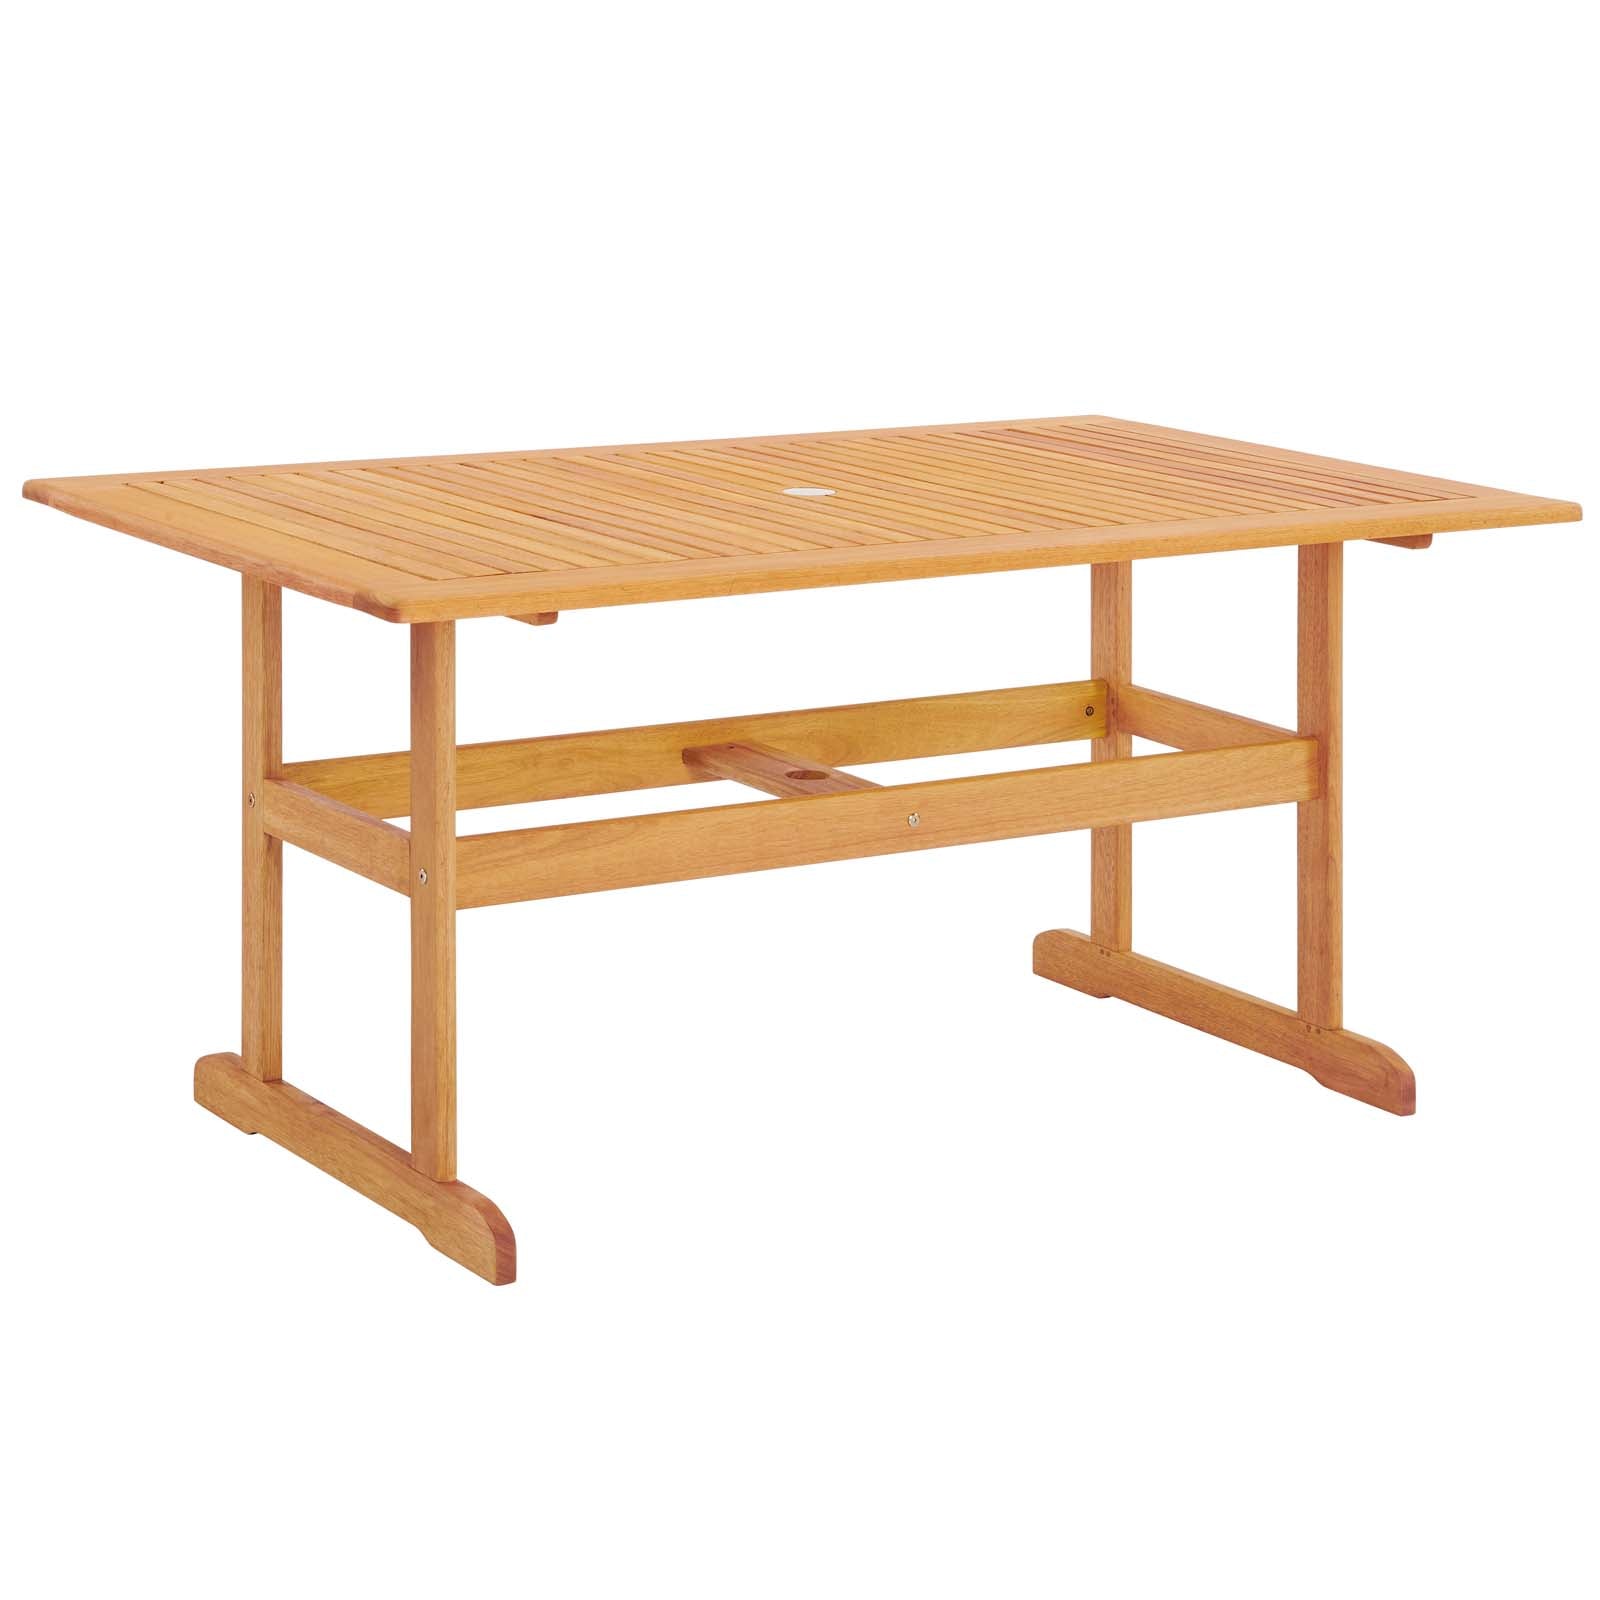 Hatteras 59" Rectangle Outdoor Patio Eucalyptus Wood Dining Table - East Shore Modern Home Furnishings